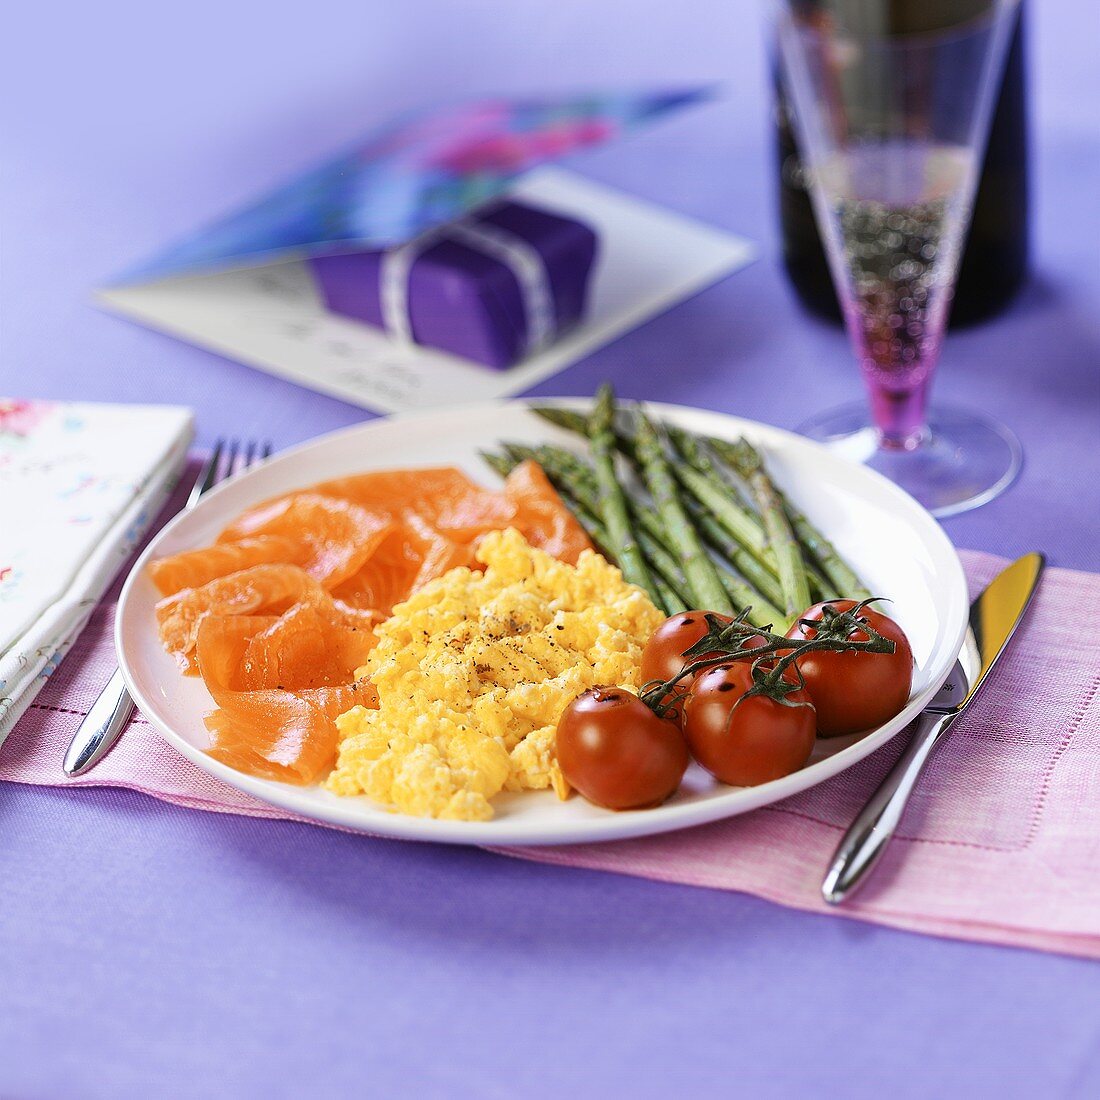 Scrambled egg with salmon, asparagus and tomato